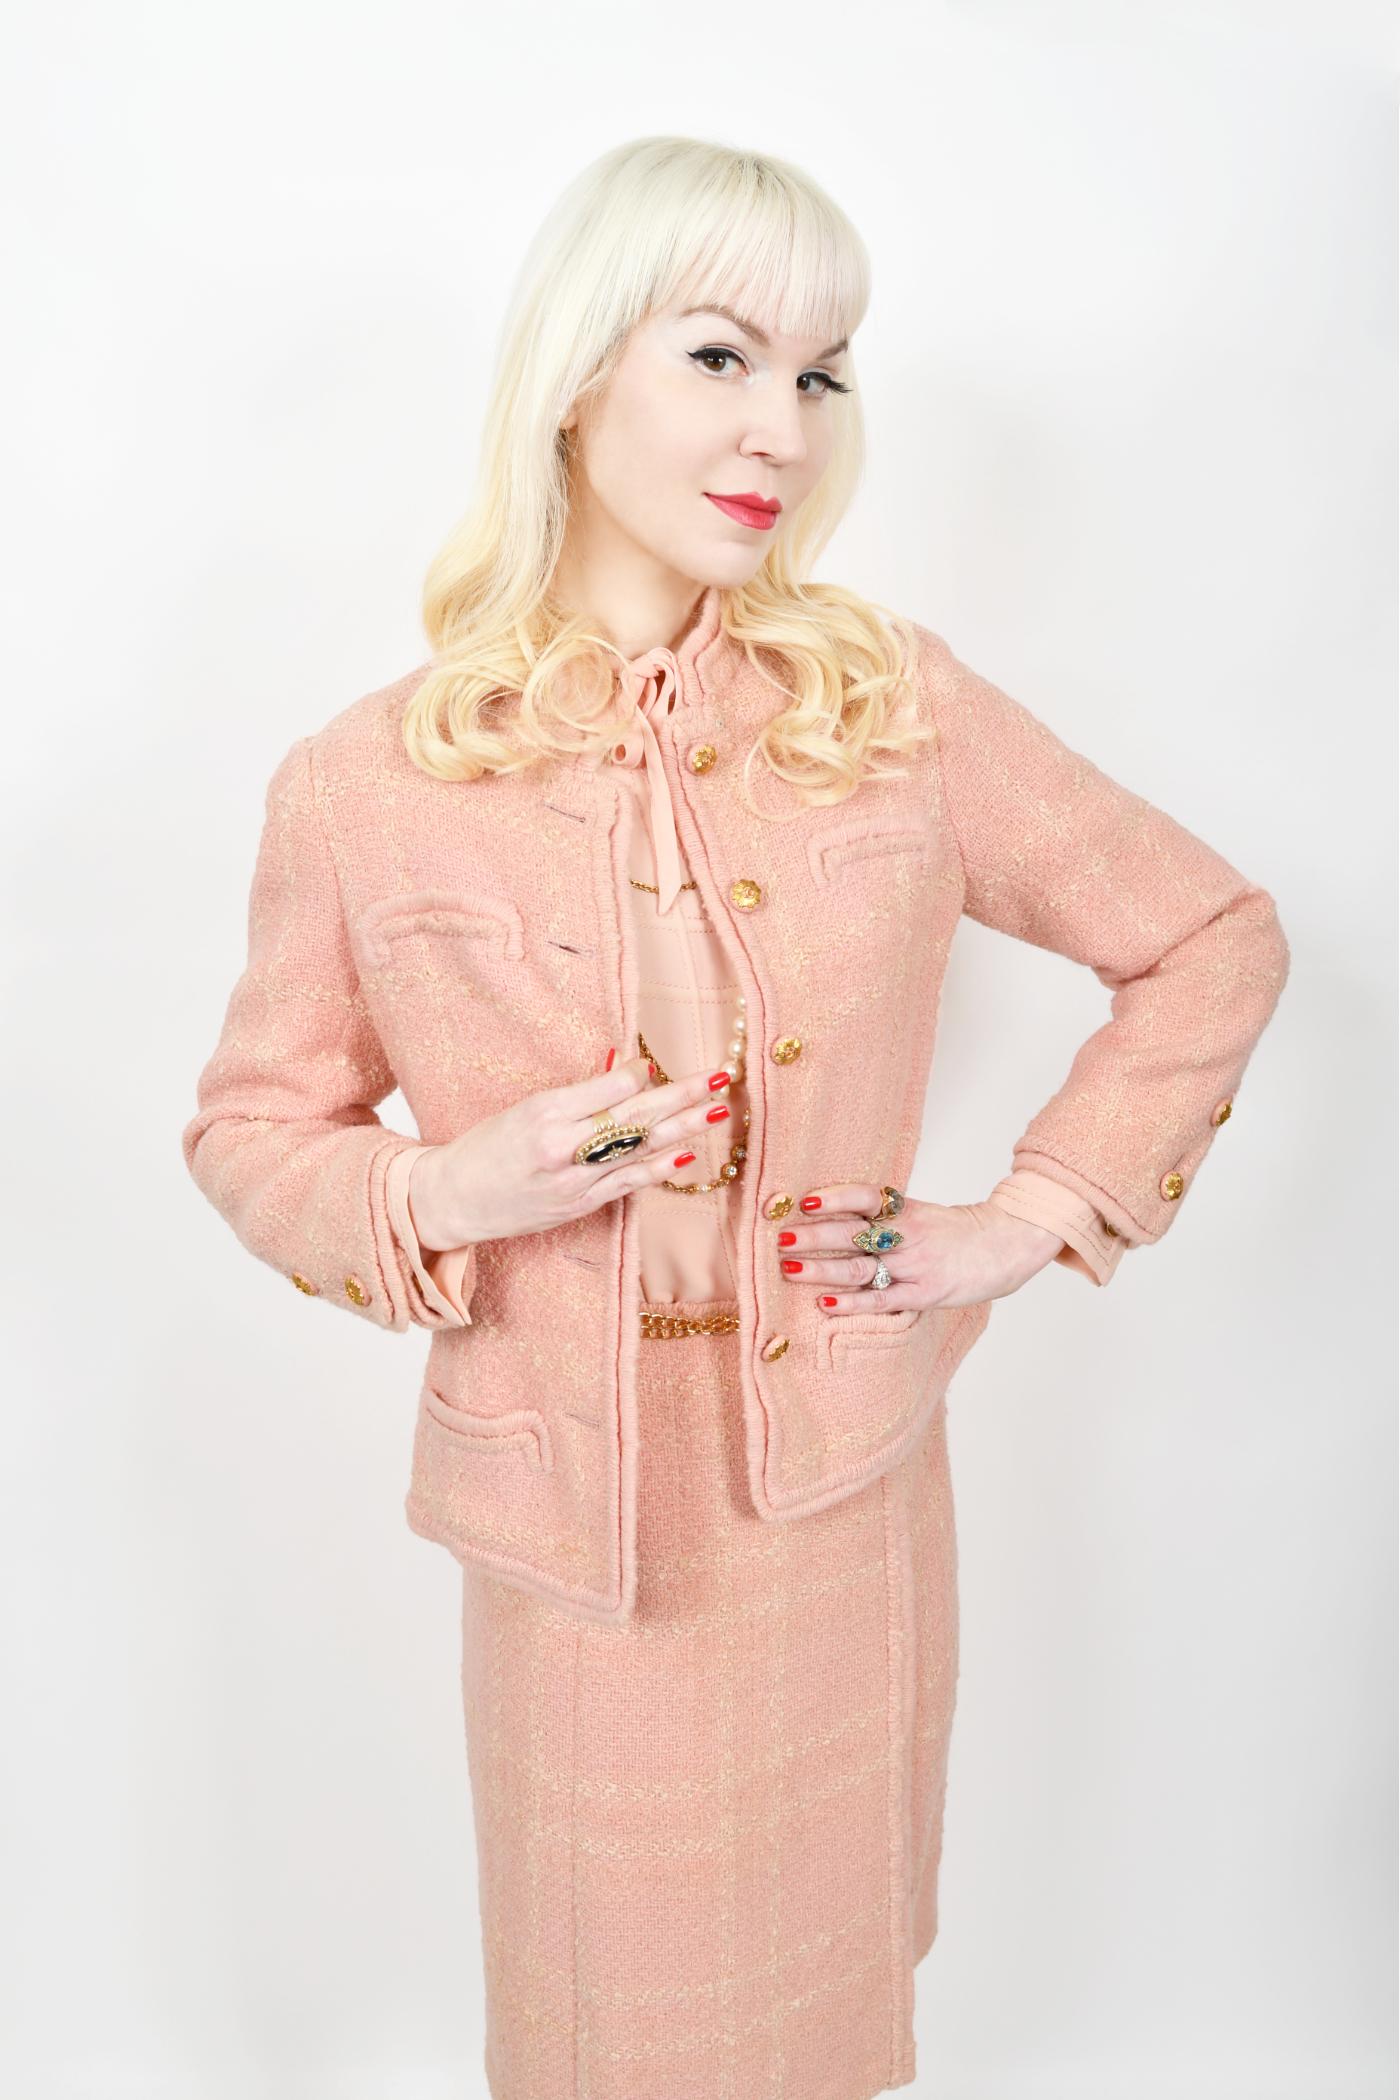 Women's Vintage 1973 Chanel Haute Couture Documented Pink Wool Jacket Blouse Skirt Suit For Sale